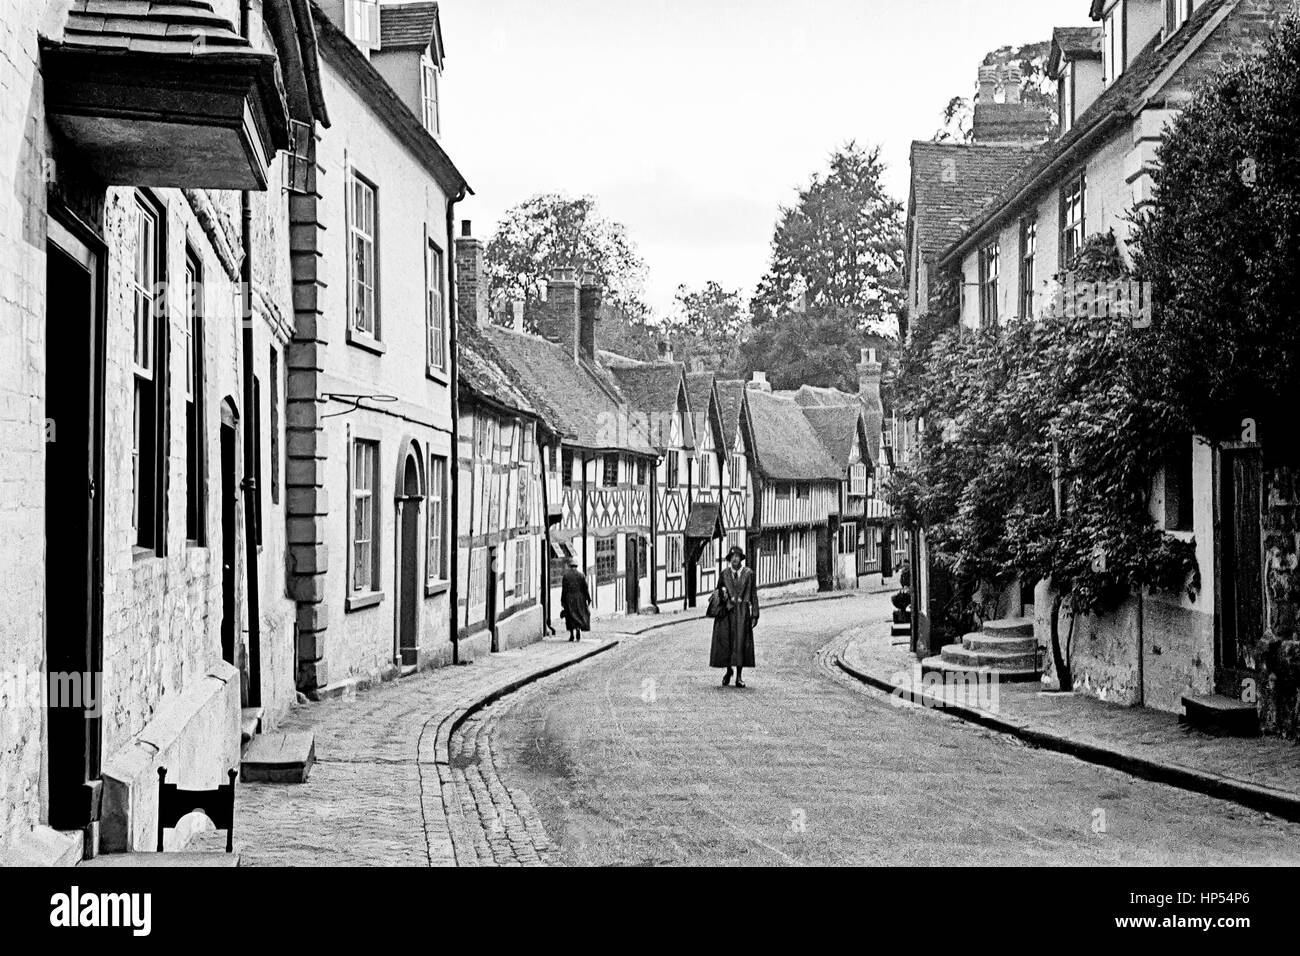 A lady walking in the middle of a quite Warwick road carrying a bag. In the distance another lady is walking on the pavement, sidewalk, away from the camera. Photograph taken in the 1940's, restored from a high resolution scan taken from the original negative. Stock Photo